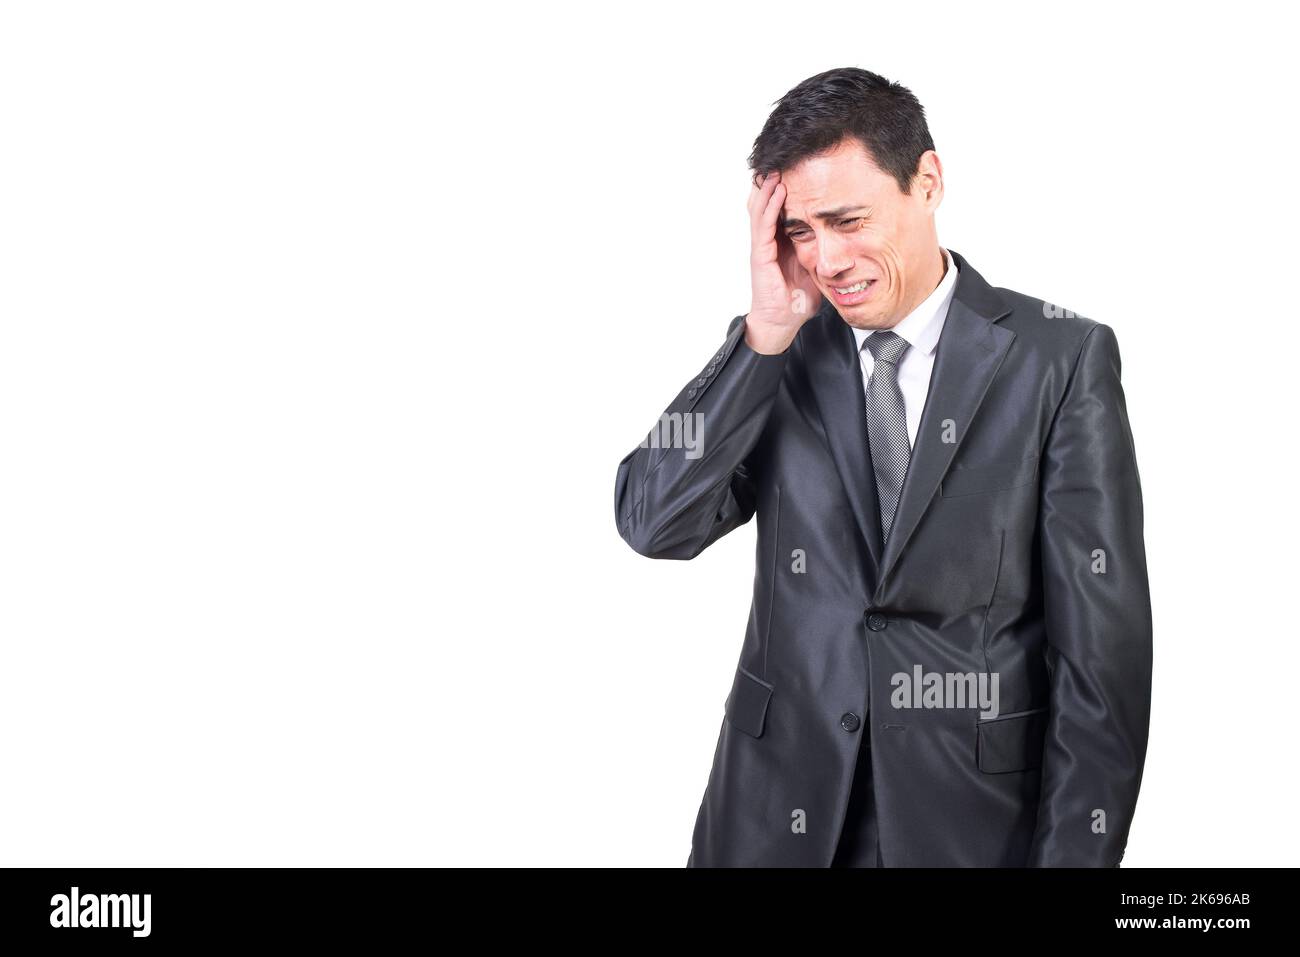 Crying man in formal suit touching head Stock Photo